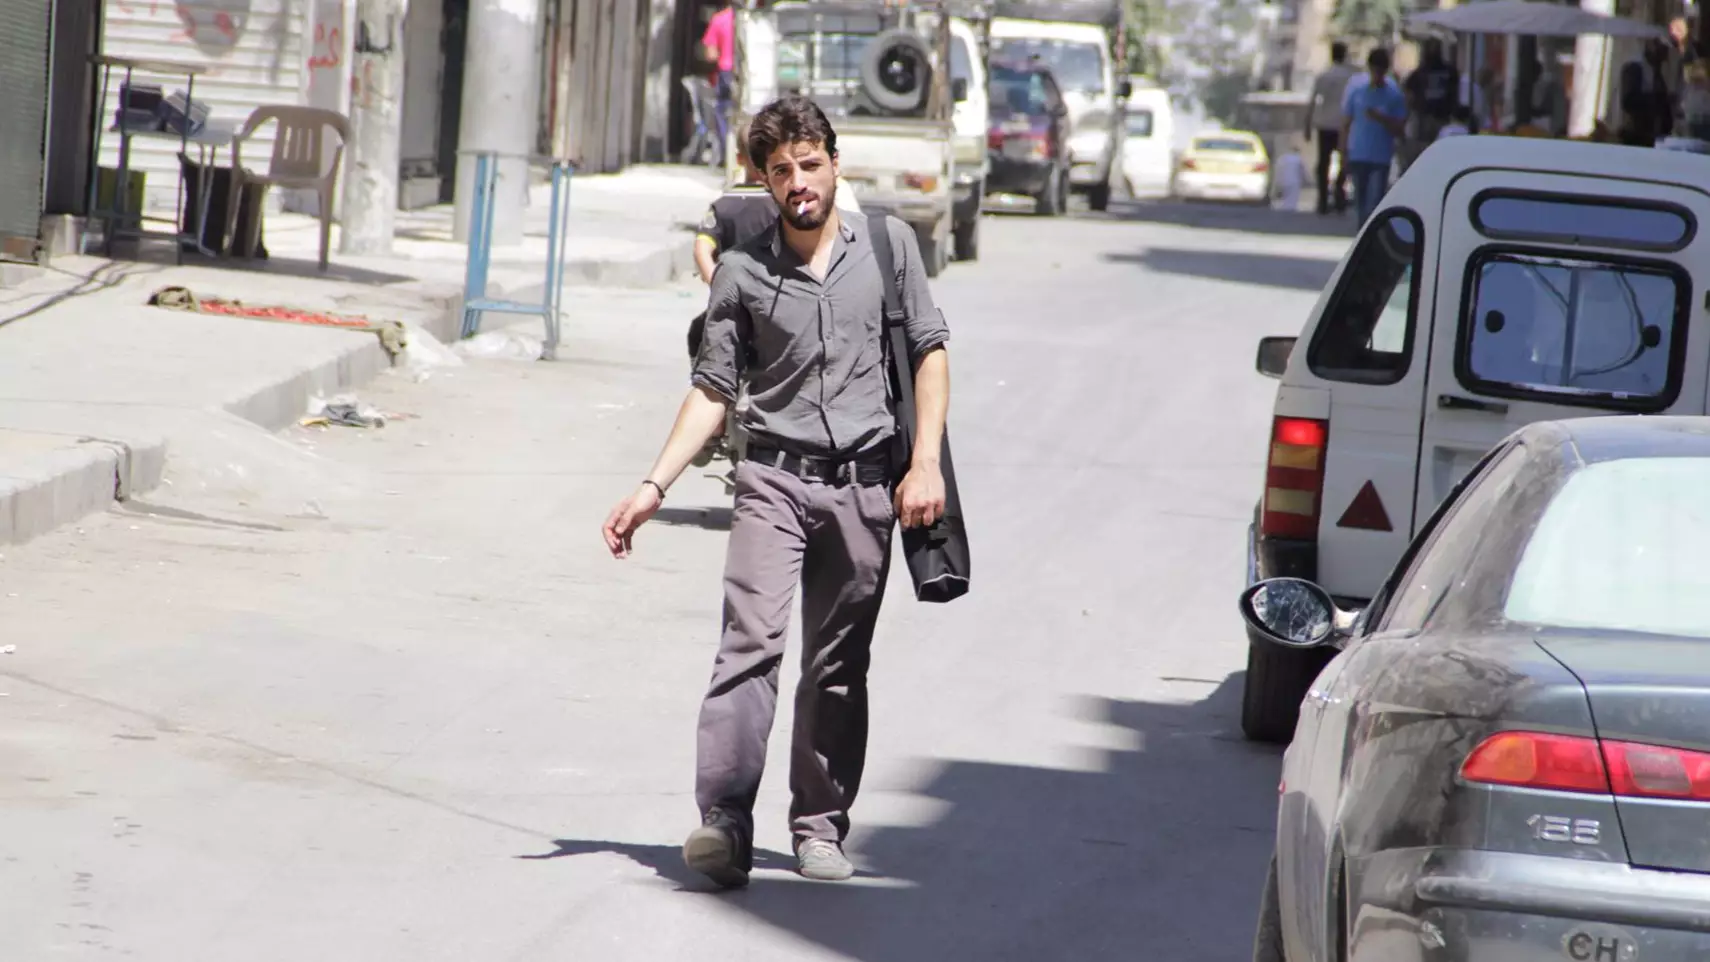 This War Photographer Ditched His Camera To Help Dying Syrian Children